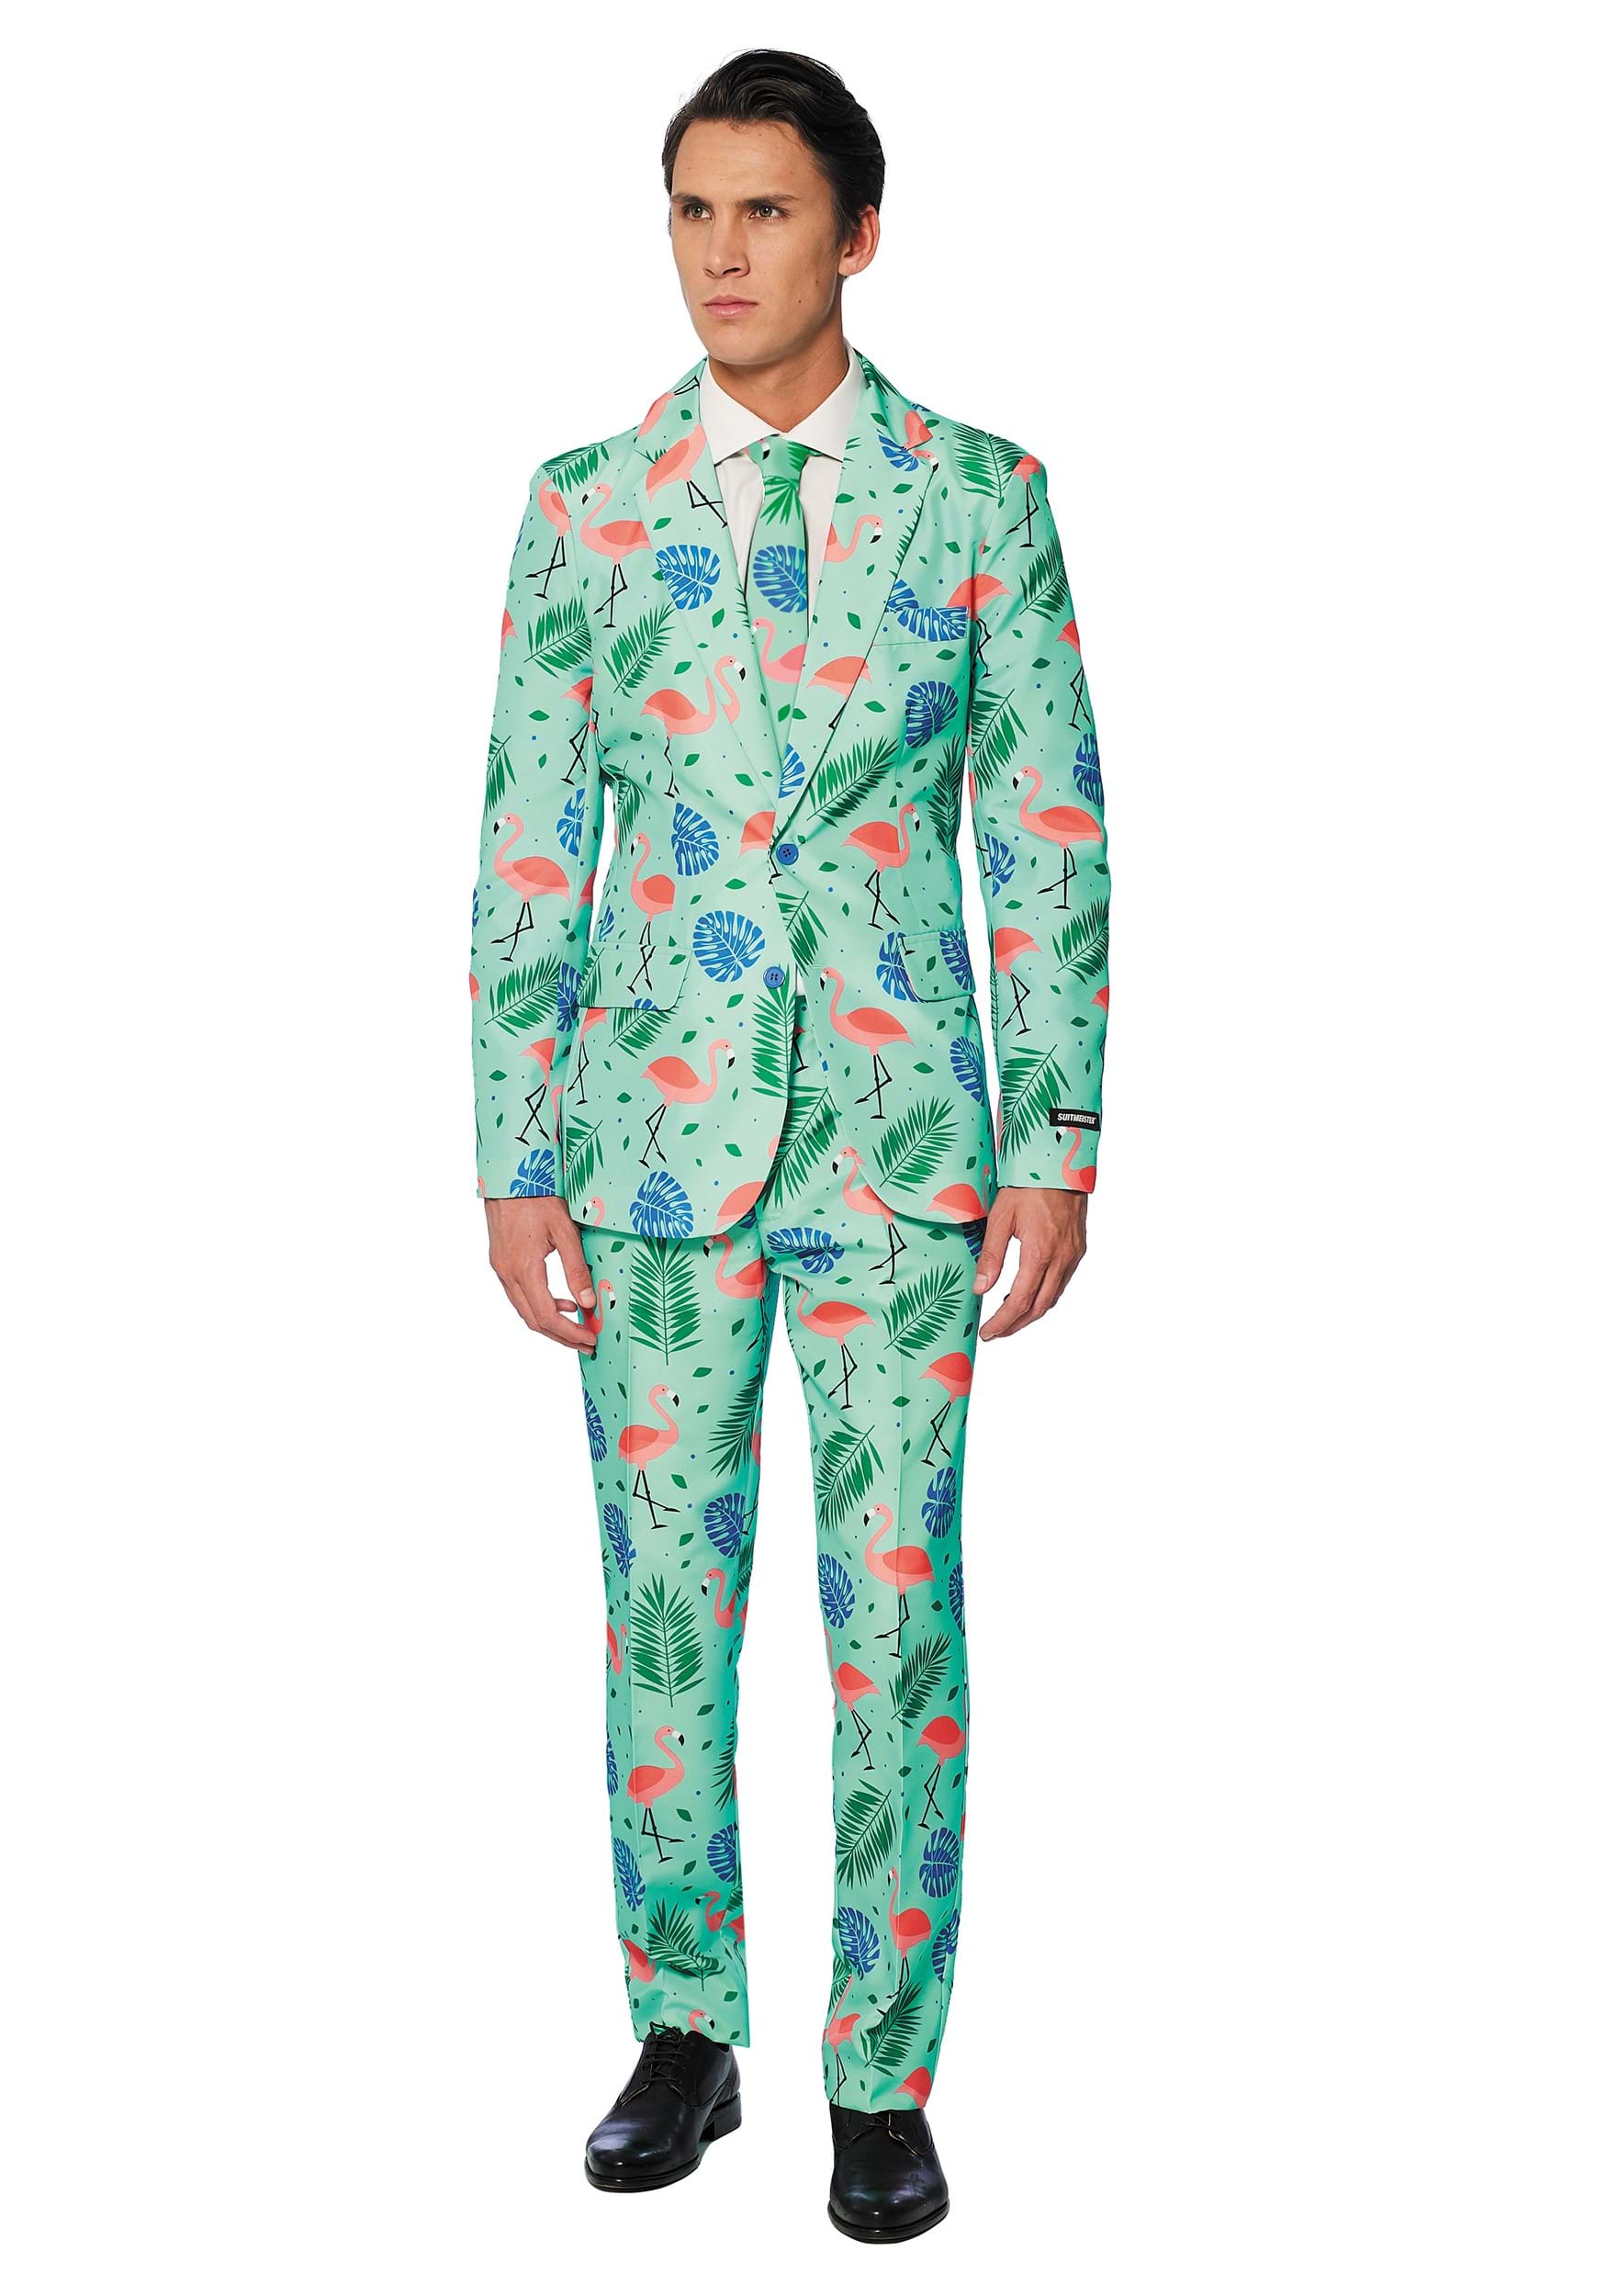 Image of Men's Suitmeister Tropical Suit Costume ID OSOBAS0040-L